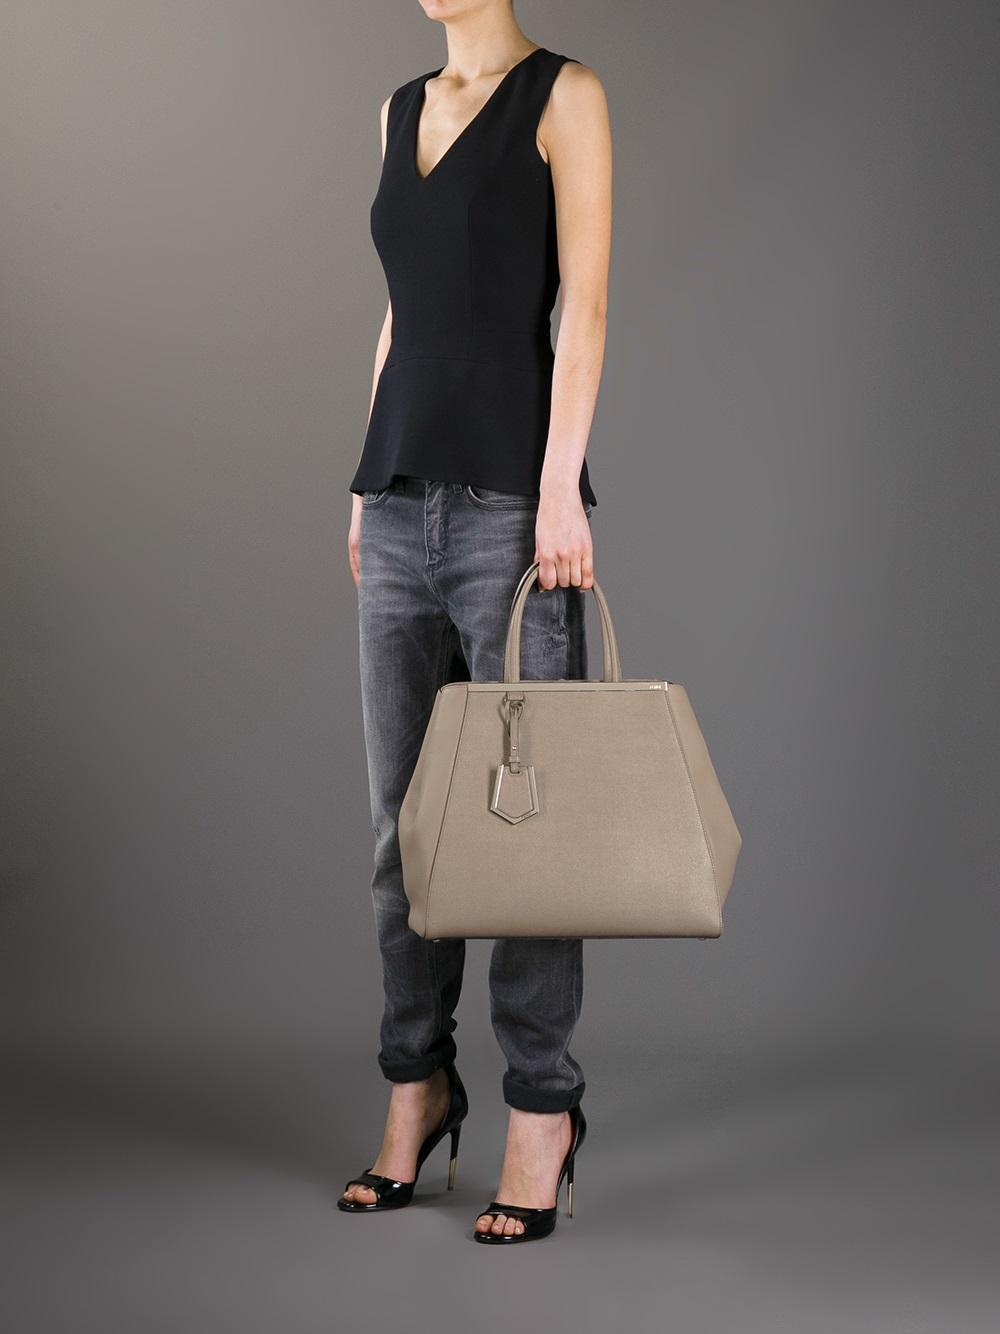 Fendi 2jours Large Tote in Brown - Lyst